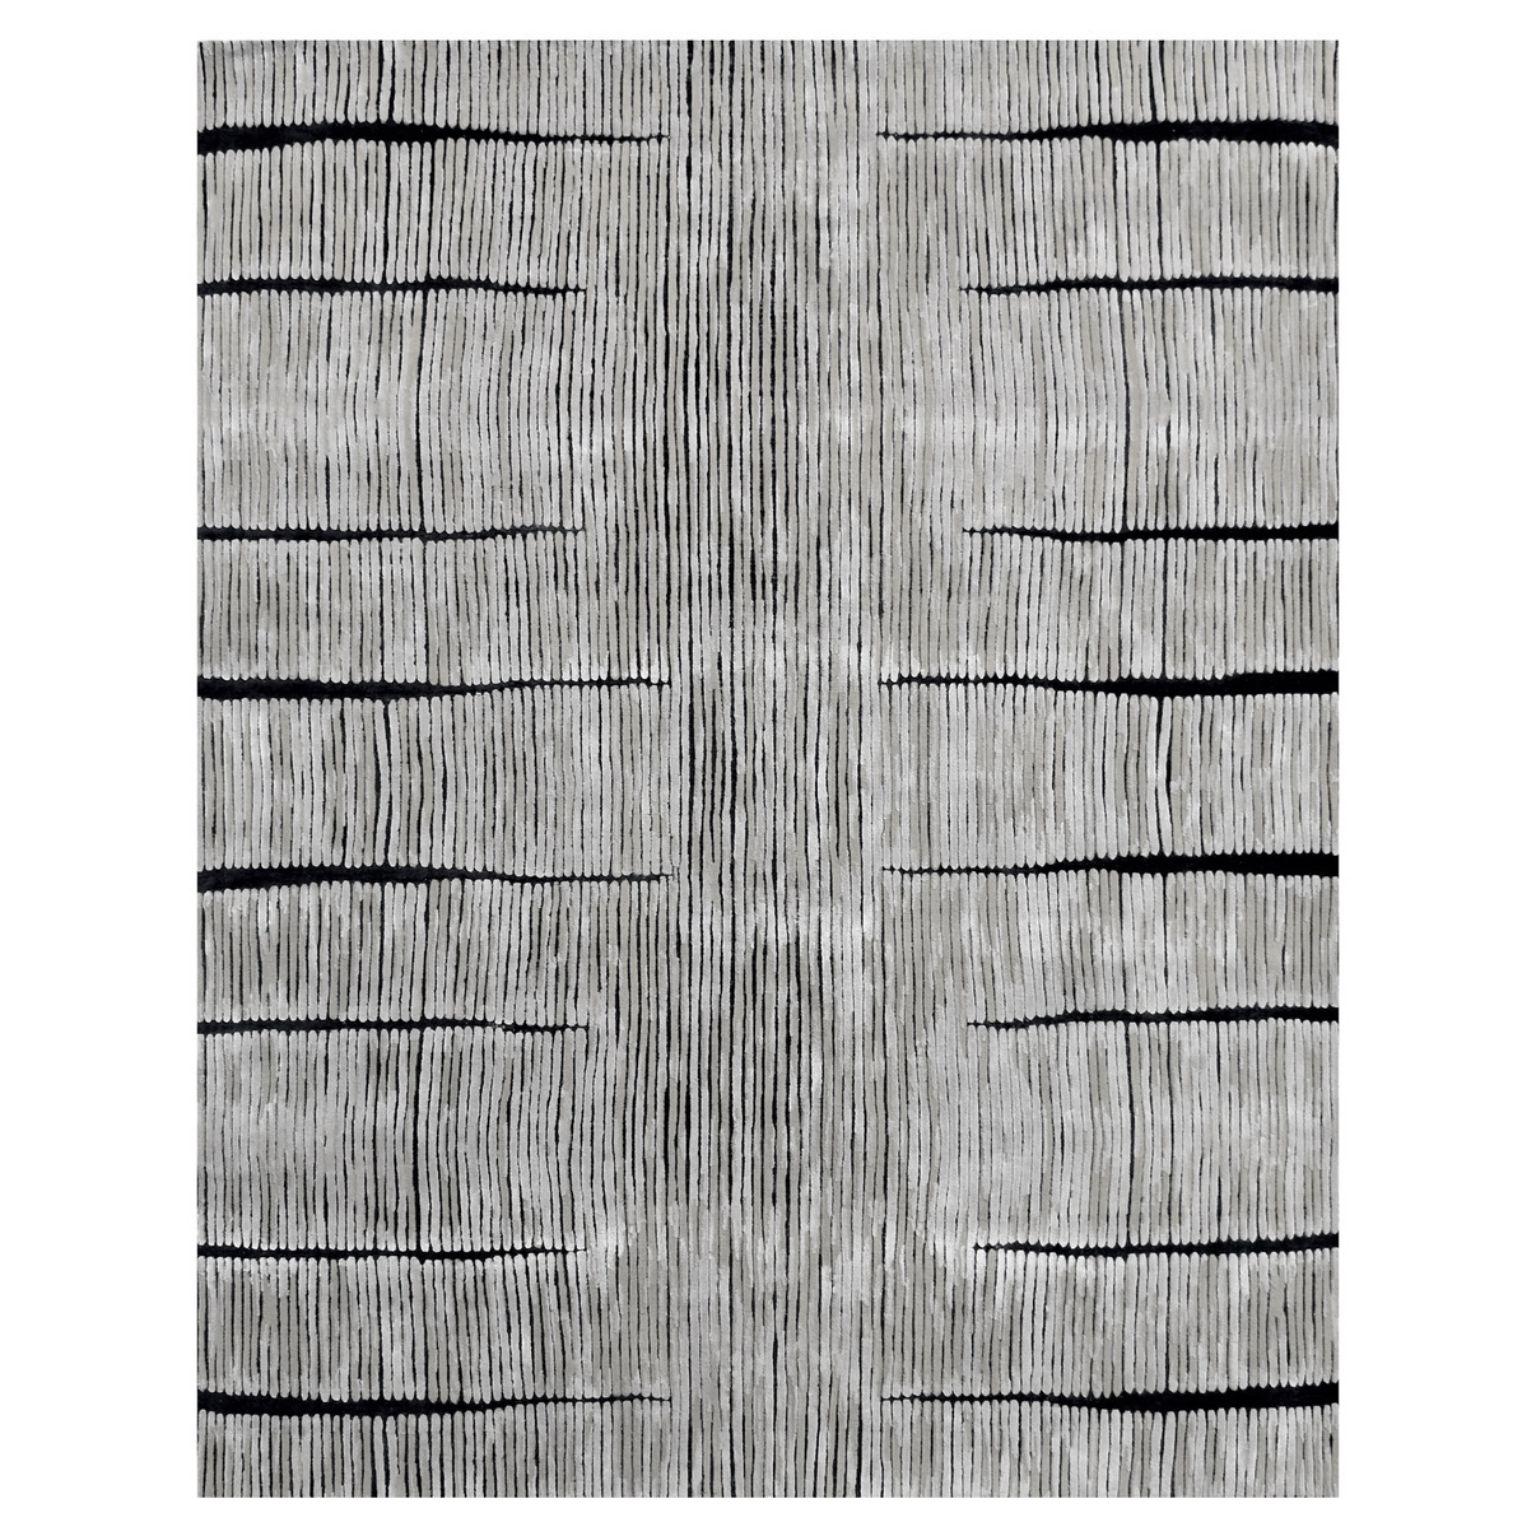 Just a Trace Small Rug by Art & Loom
Dimensions: D243.4 x H304.8 cm
Materials: New Zealand wool & Chinese silk
Quality (Knots per Inch): 100
Also available in different dimensions.

Samantha Gallacher has always had a keen eye for aesthetics,